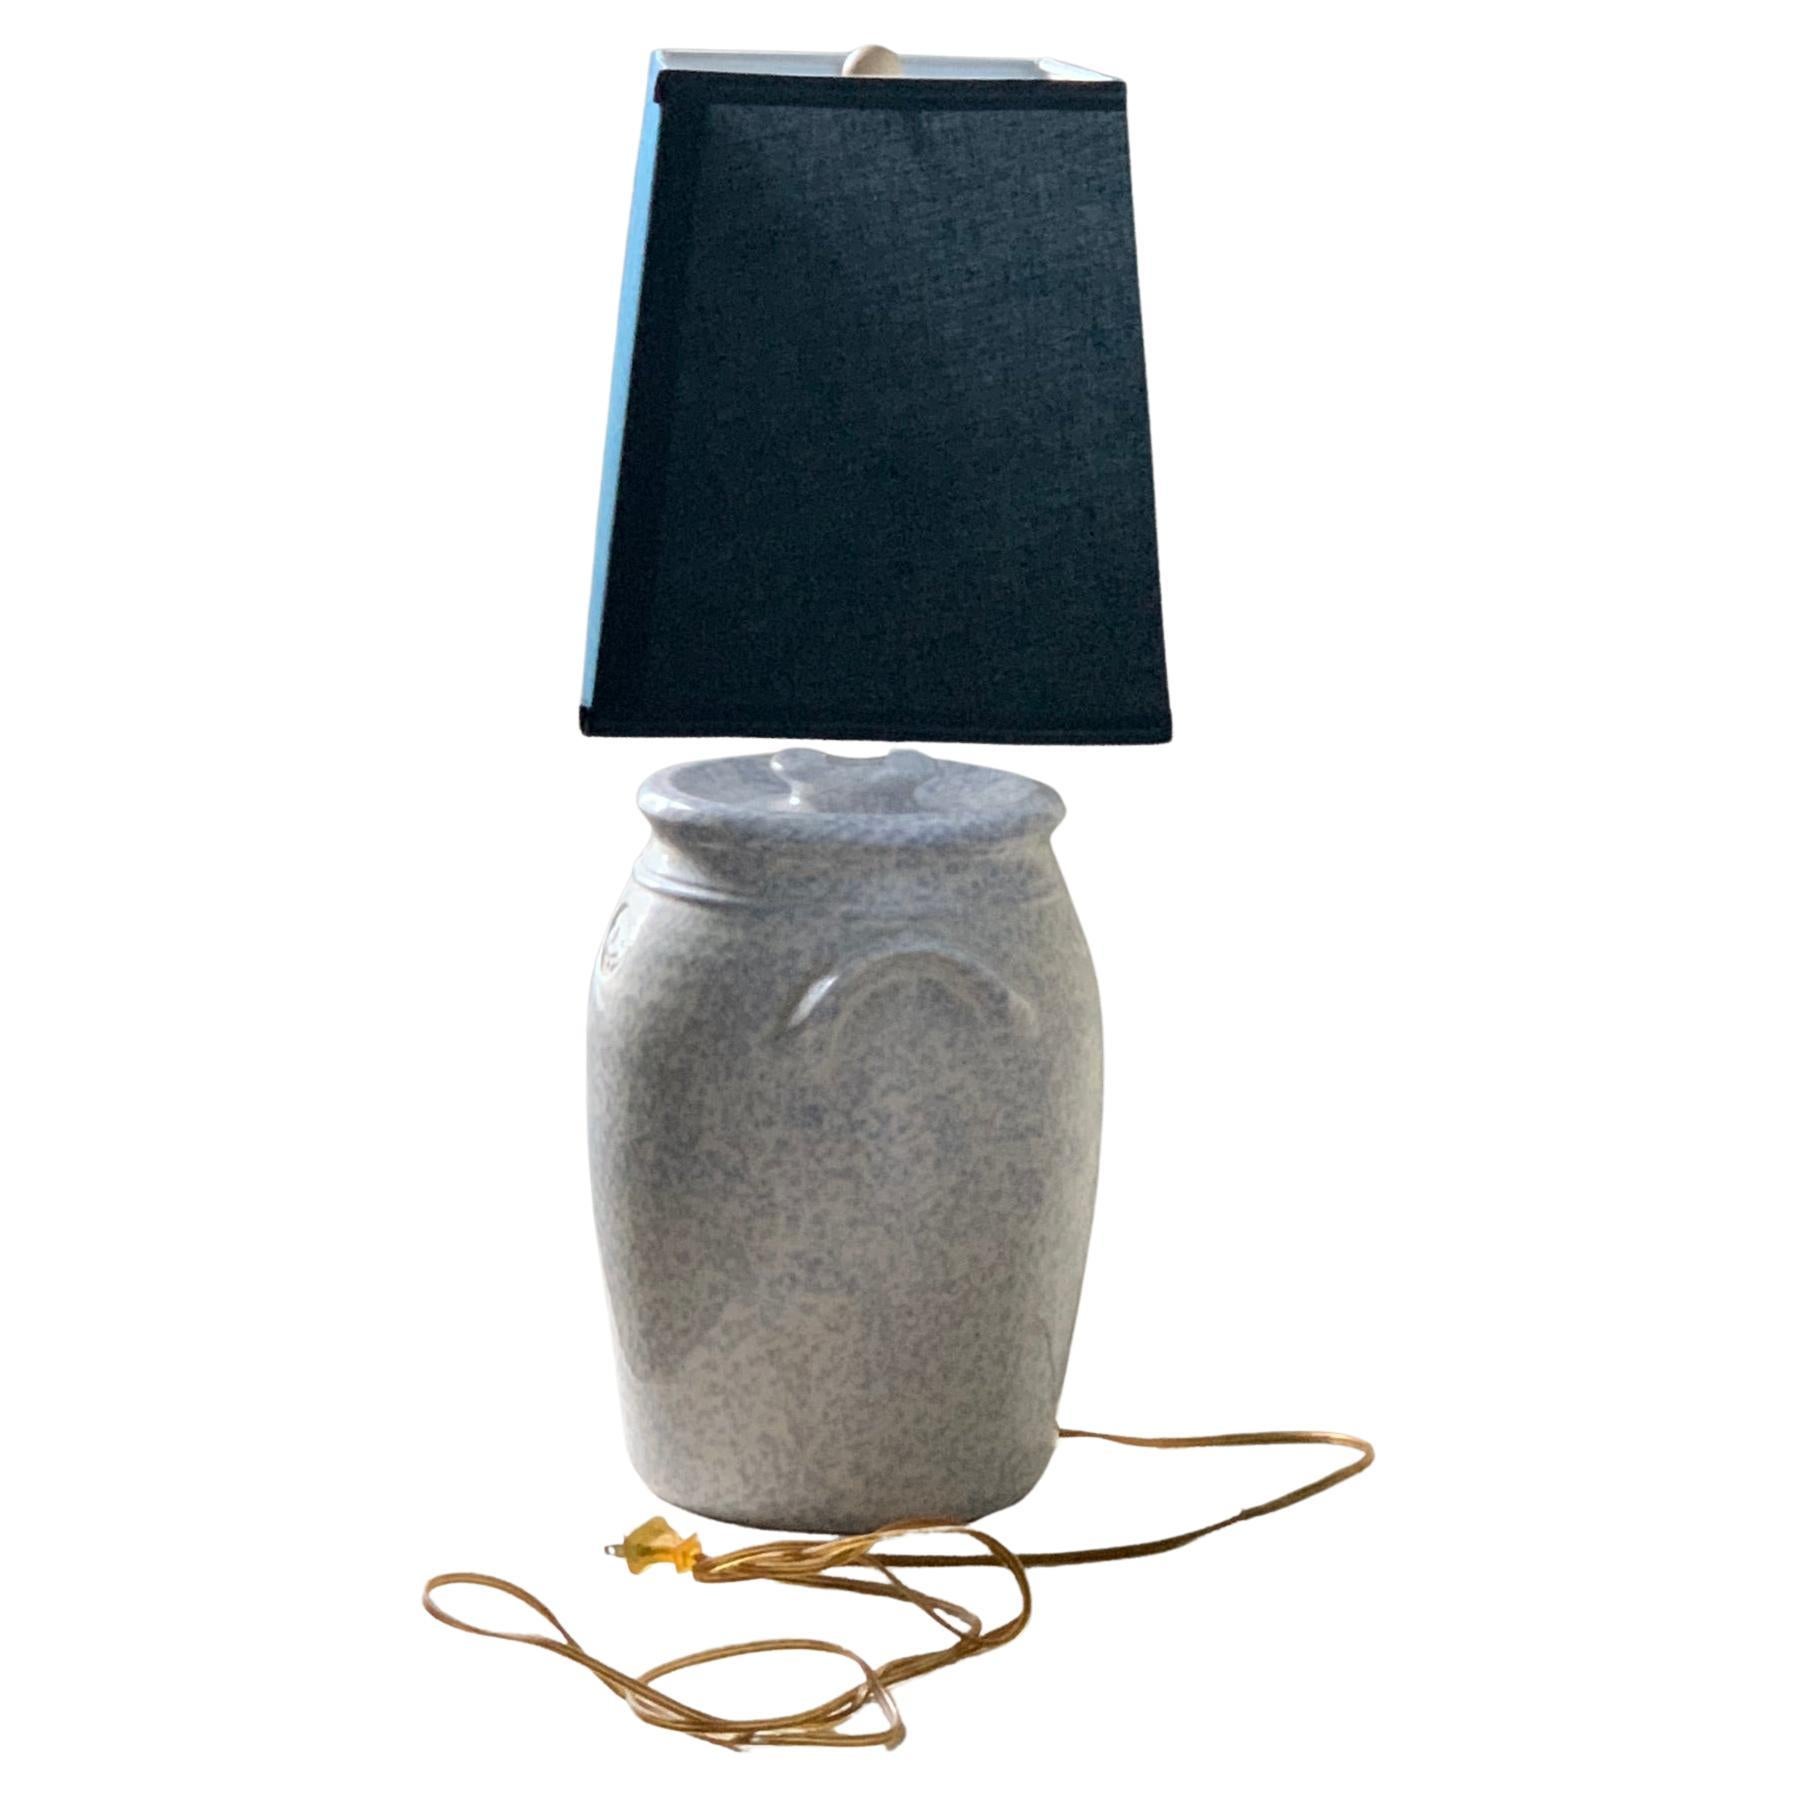 Urn table lamp with dark blue lamp shade.